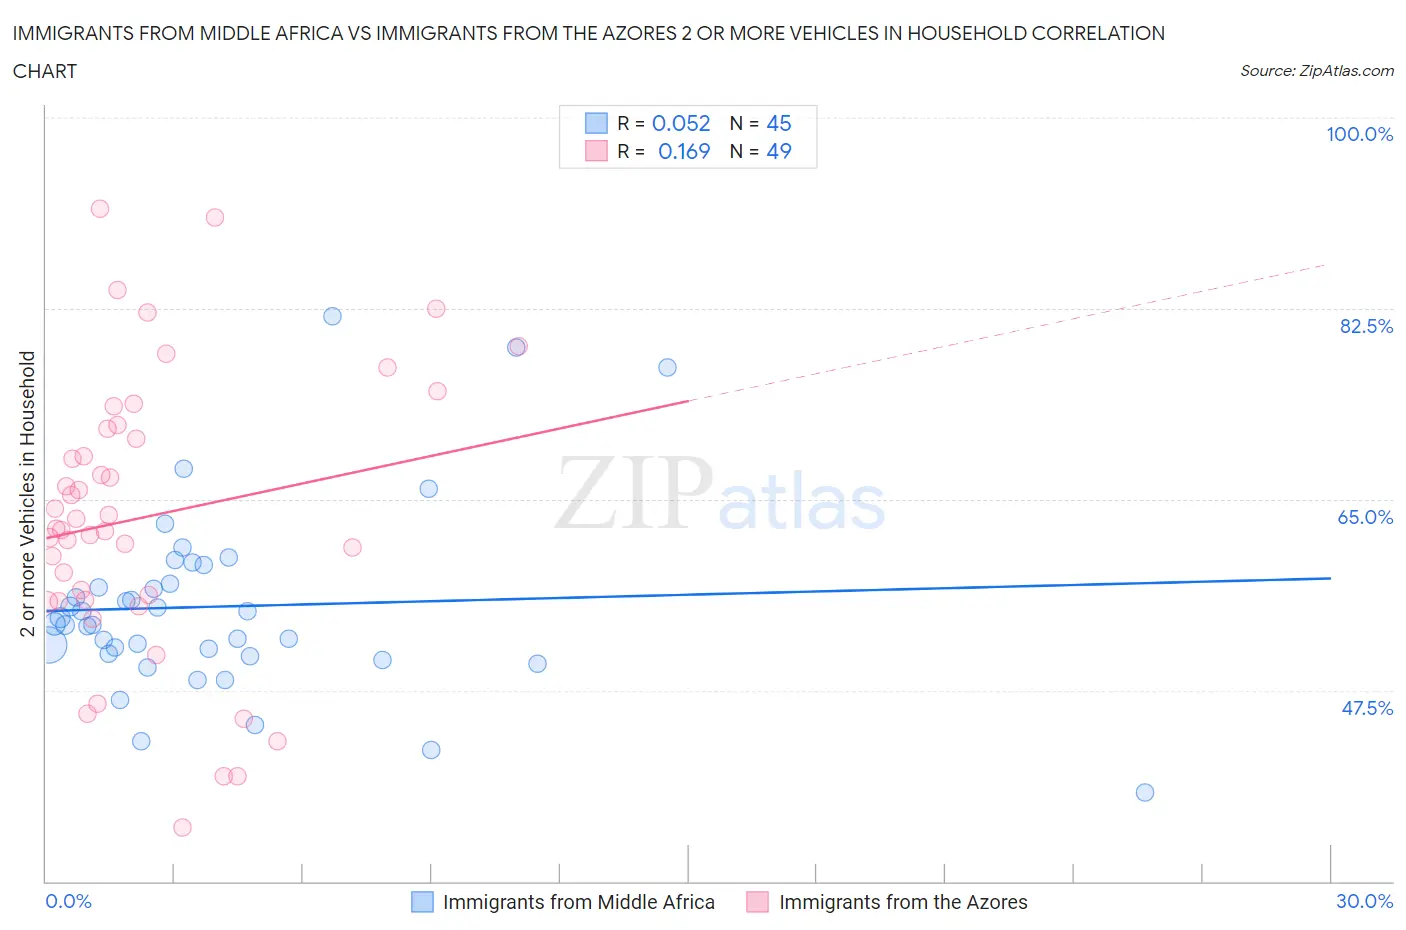 Immigrants from Middle Africa vs Immigrants from the Azores 2 or more Vehicles in Household